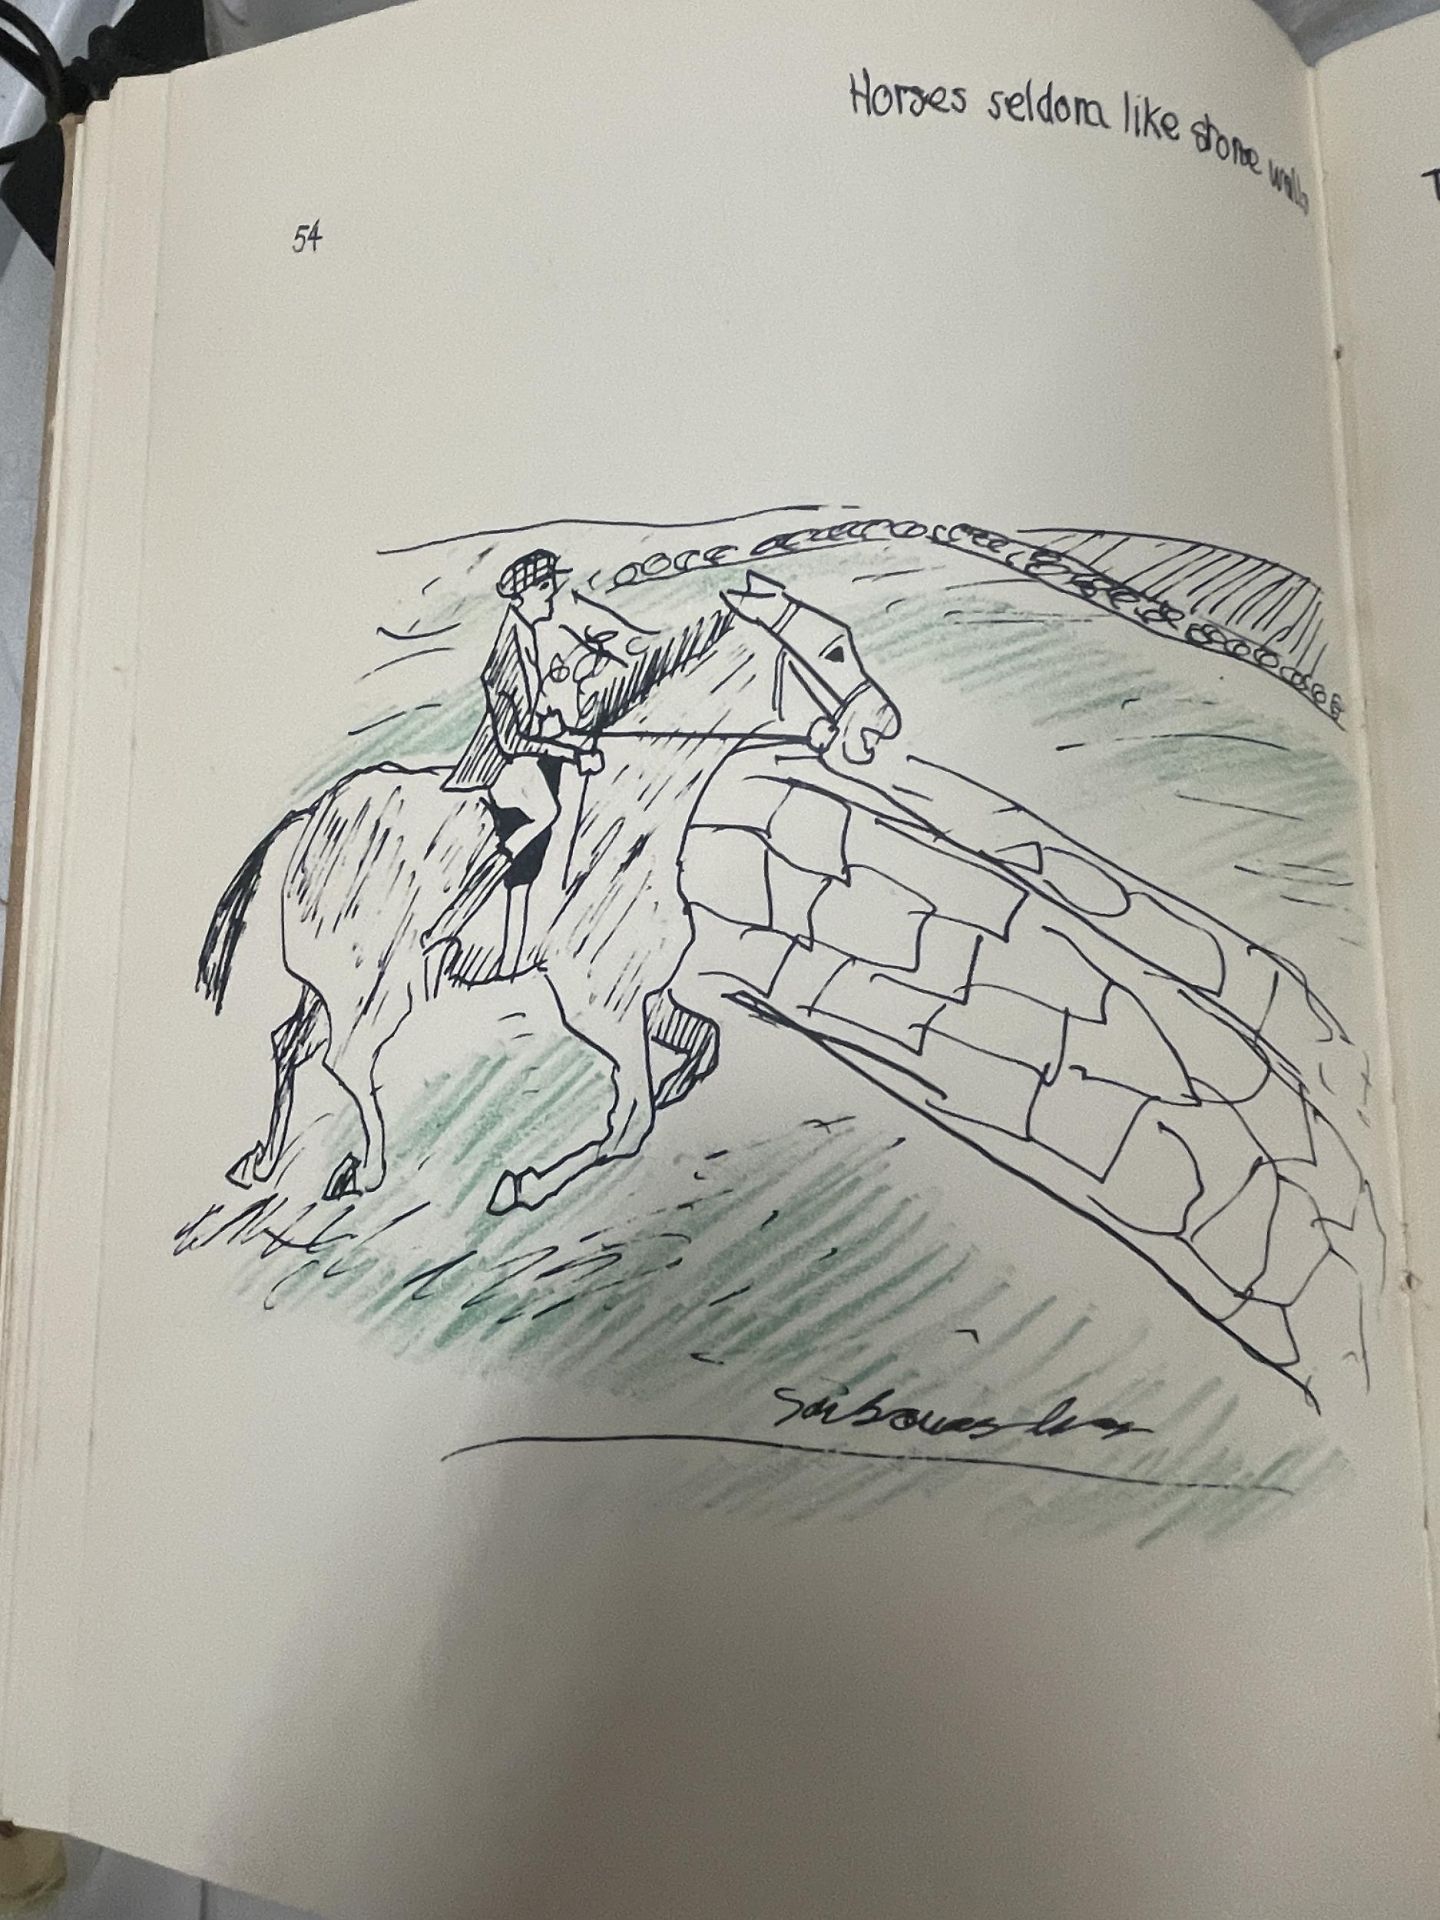 A VINTAGE BOOK ENTITLED HORSEMANSHIP AS IT IS TODAY BY SARAH BOWES LYON ILLUSTRATED BY THE AUTHOR - Image 8 of 9